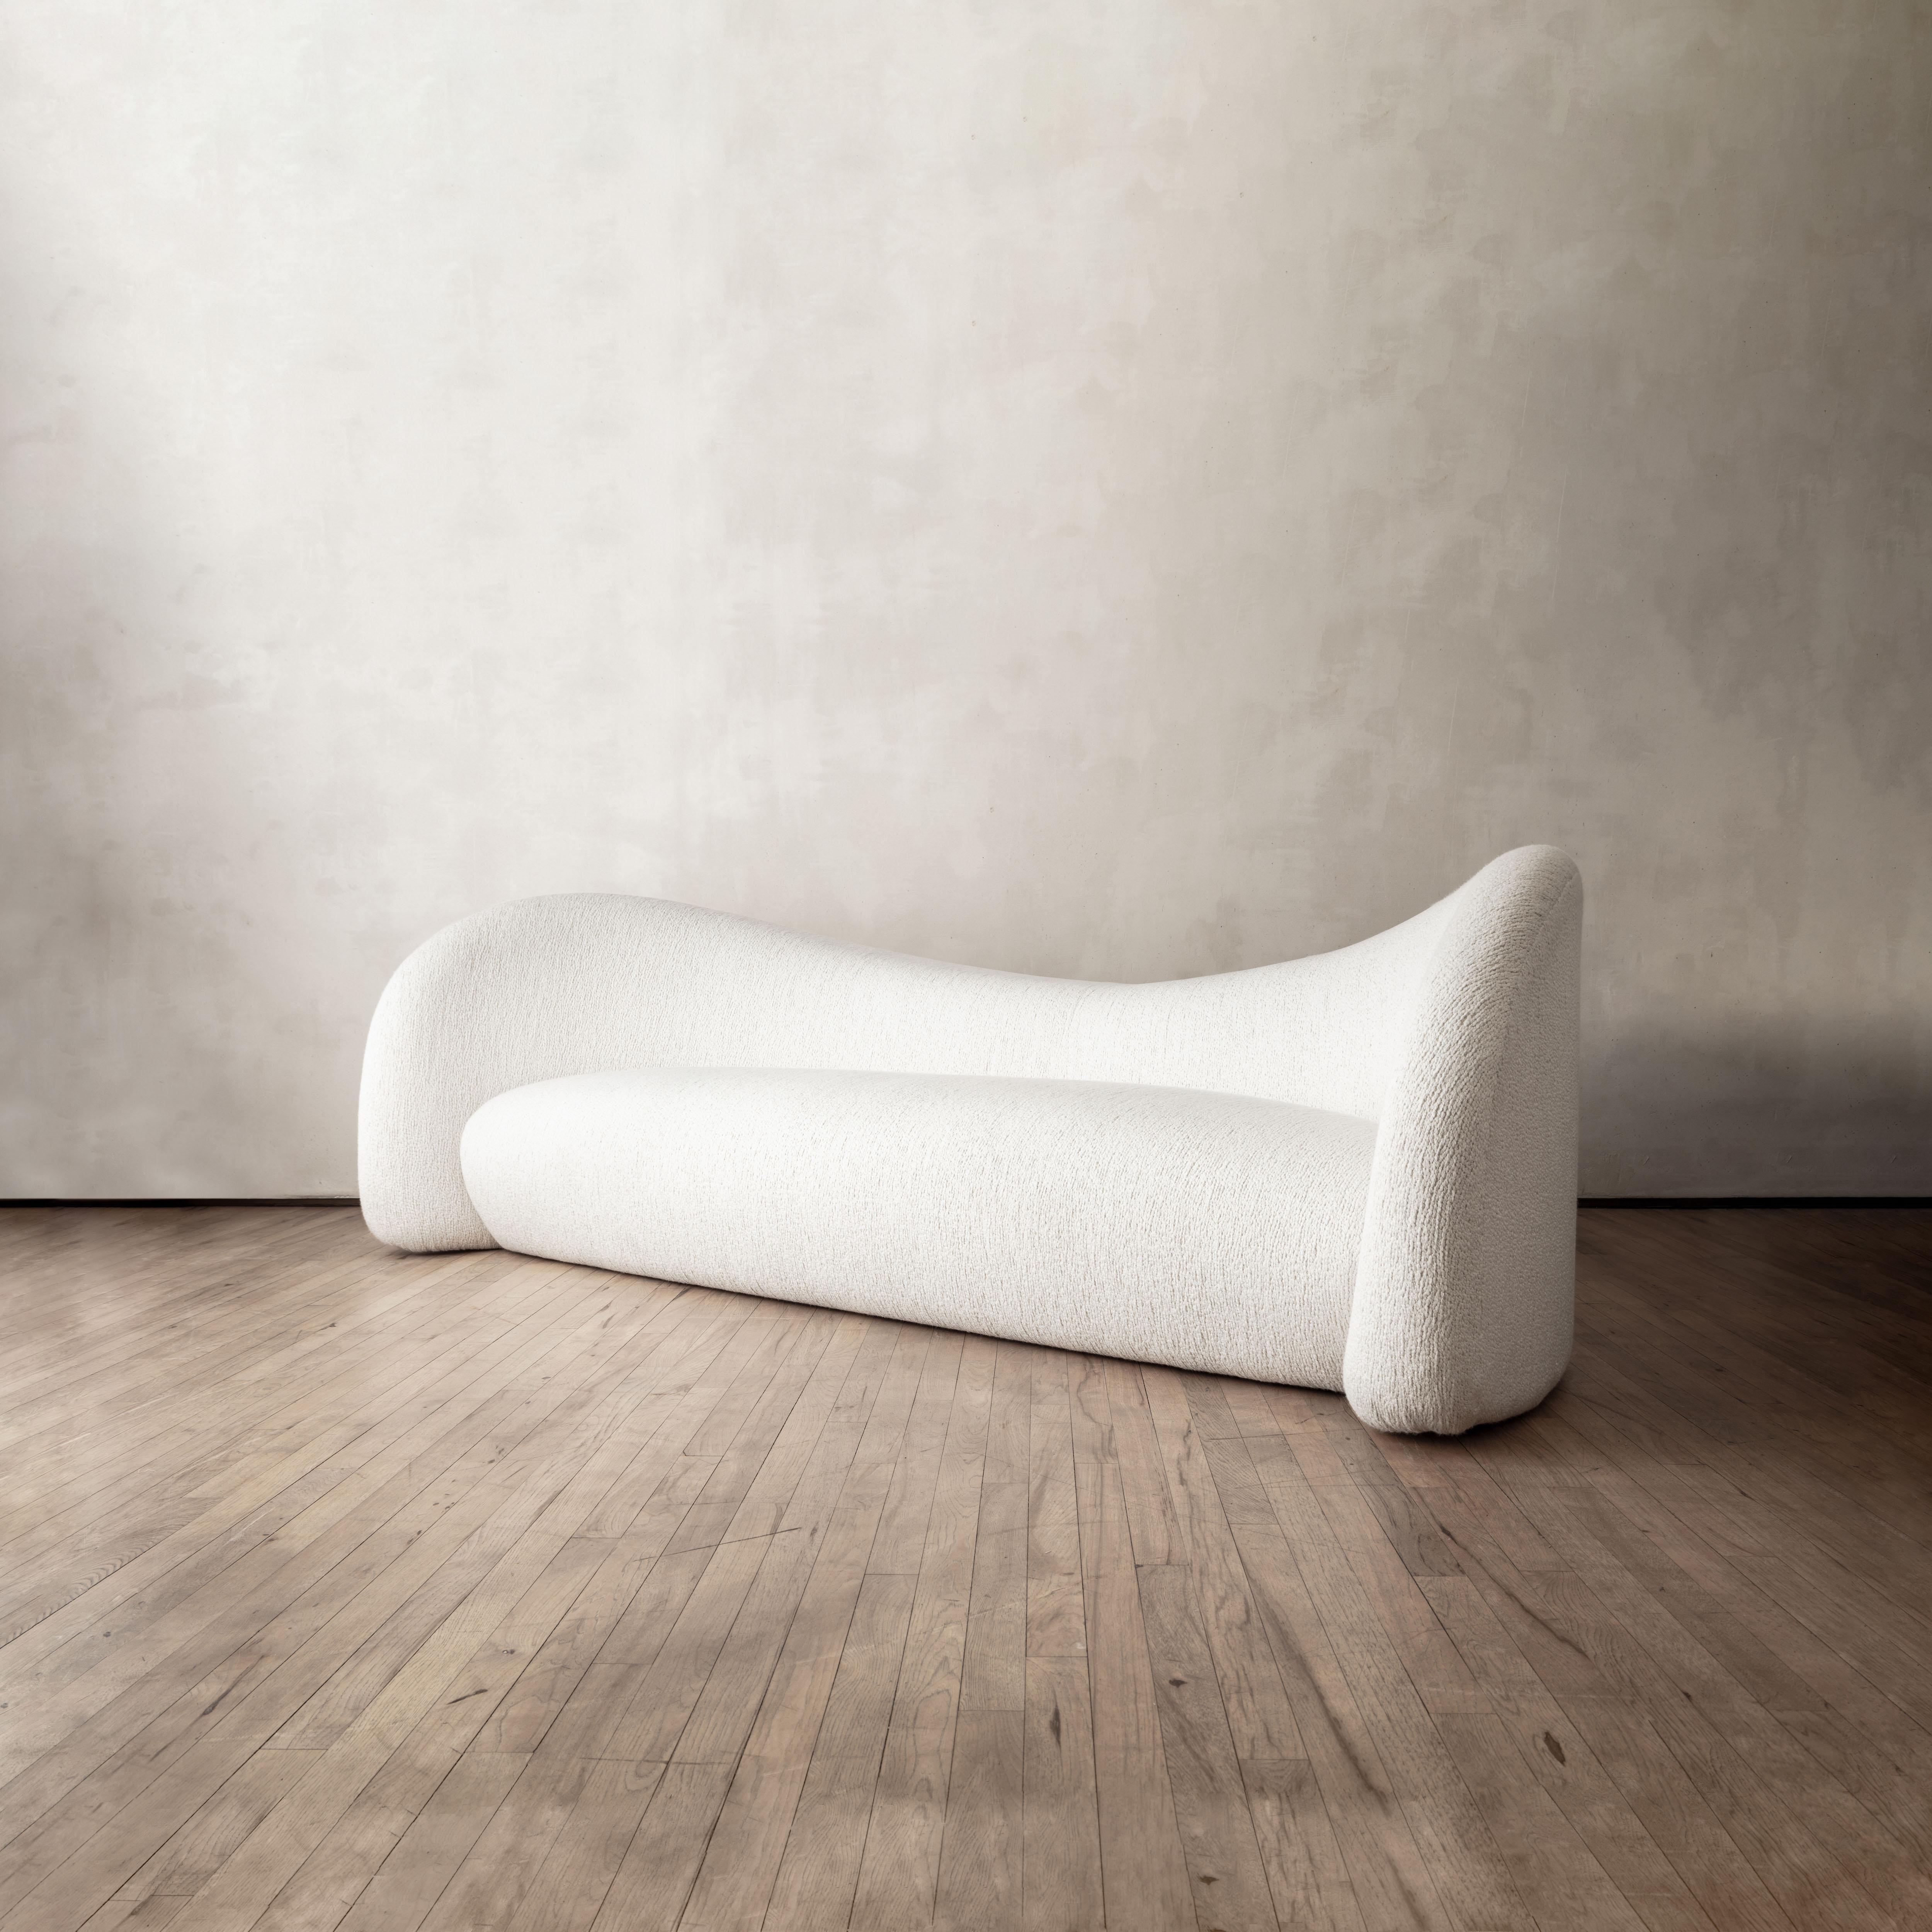 Esteemed atelier Domeau & Pérès collaborates with the Parisian designer Raphael Navot to create the moon sofa, an ergonomic seating solution upholstered in Pierre Frey bouclé. The central back support of the sofa is structured as a seat, which